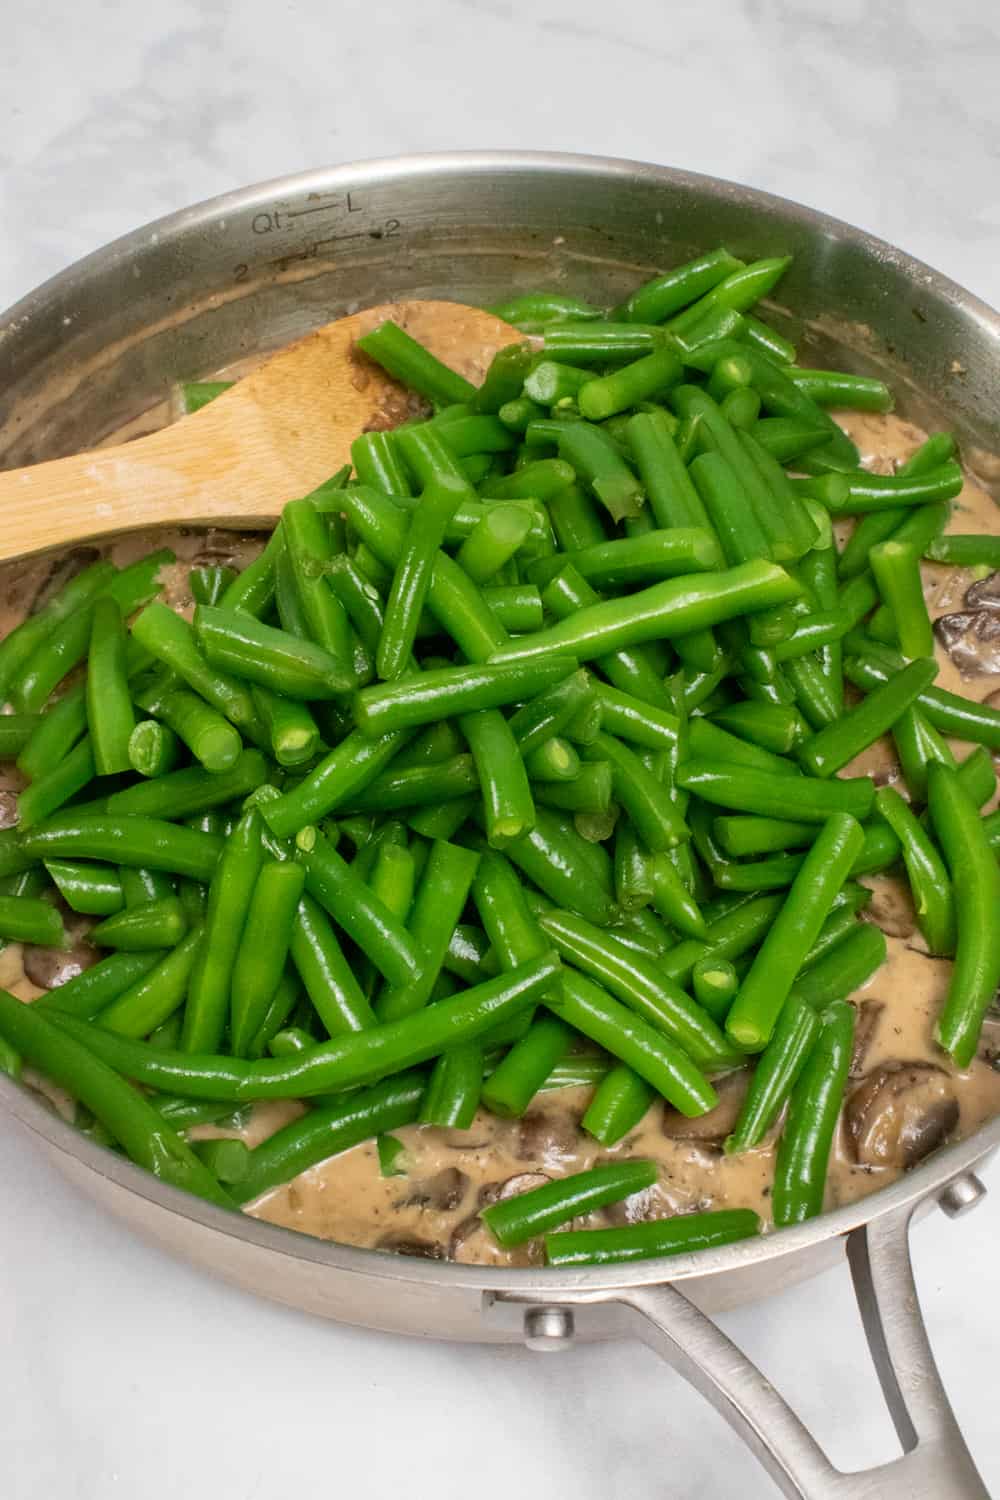 stirring in the green beans